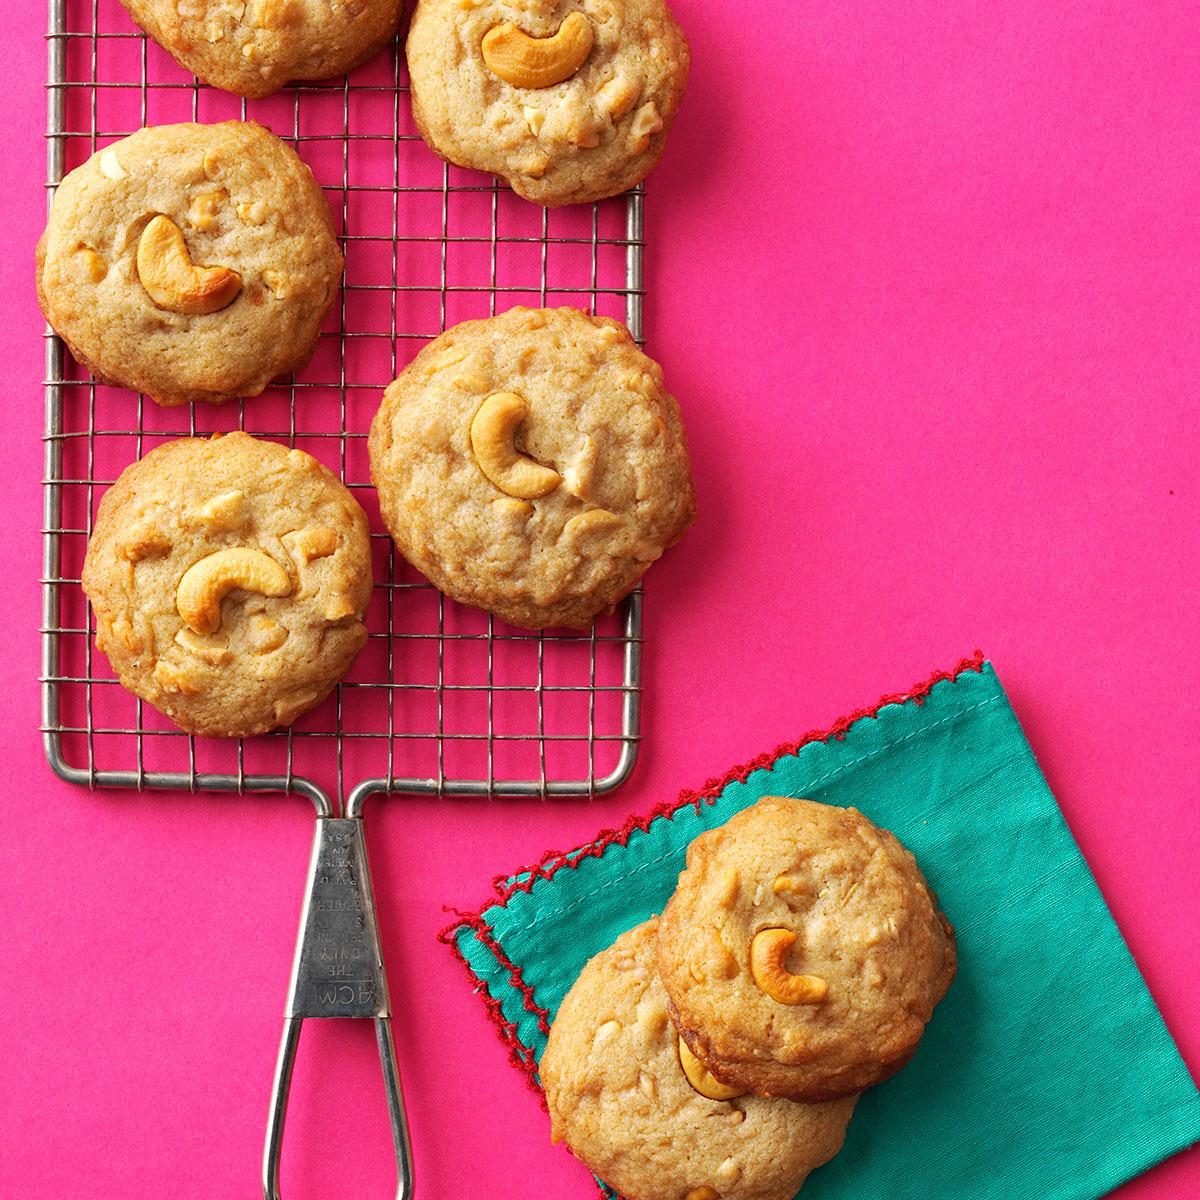 Salted Toffee Cashew Cookies